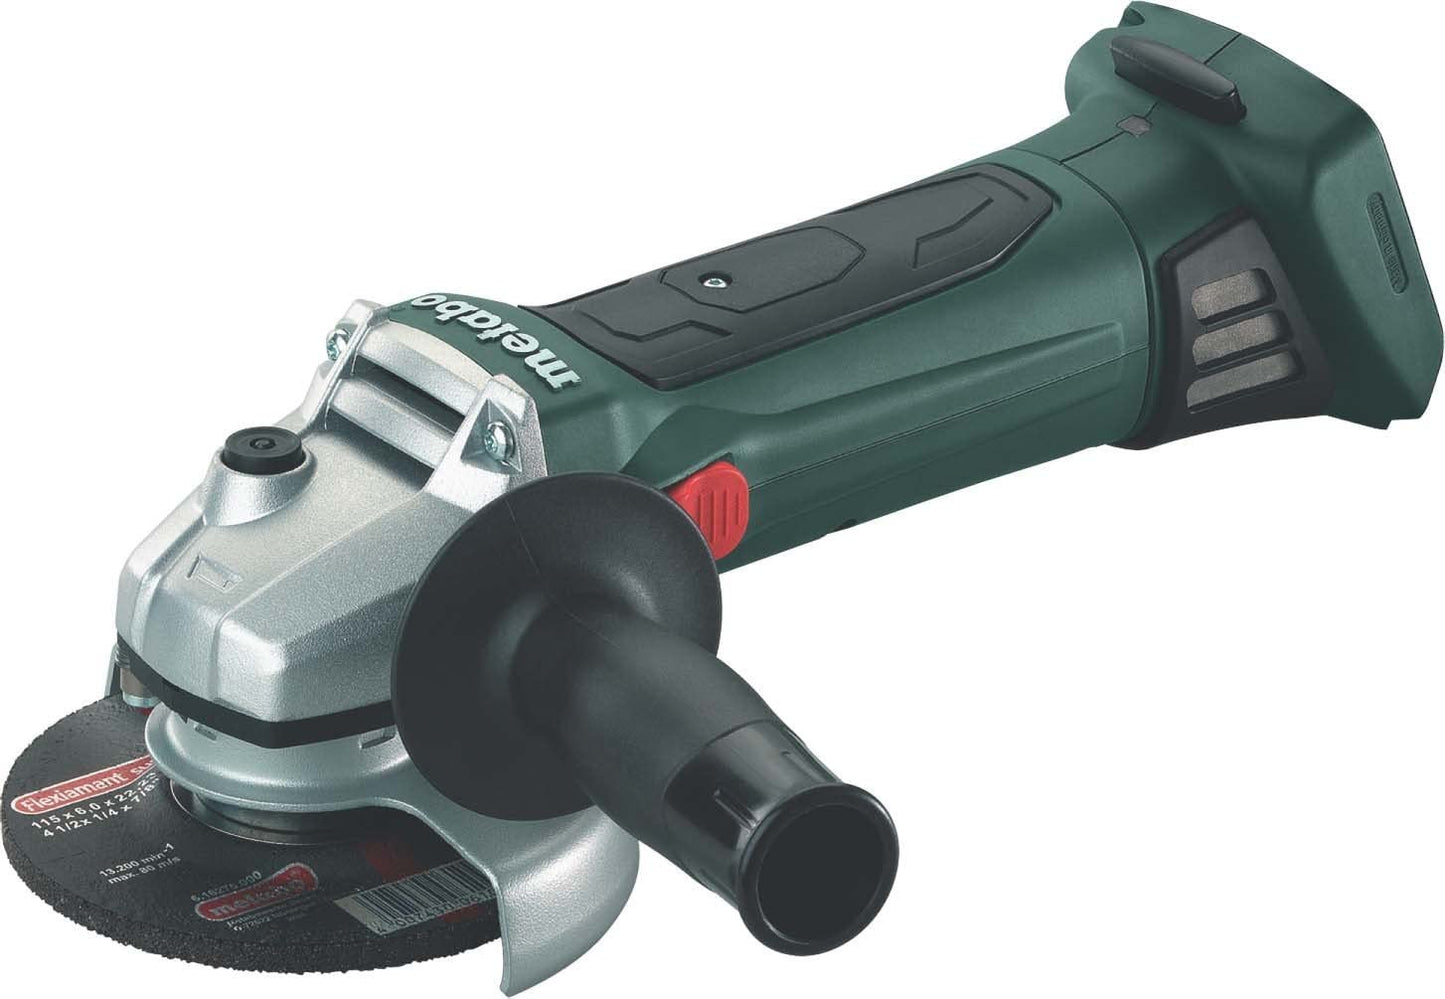 METABO W18LTX Angle Grinder 125mm 18 Volt 125MM body only + Meta Box Case